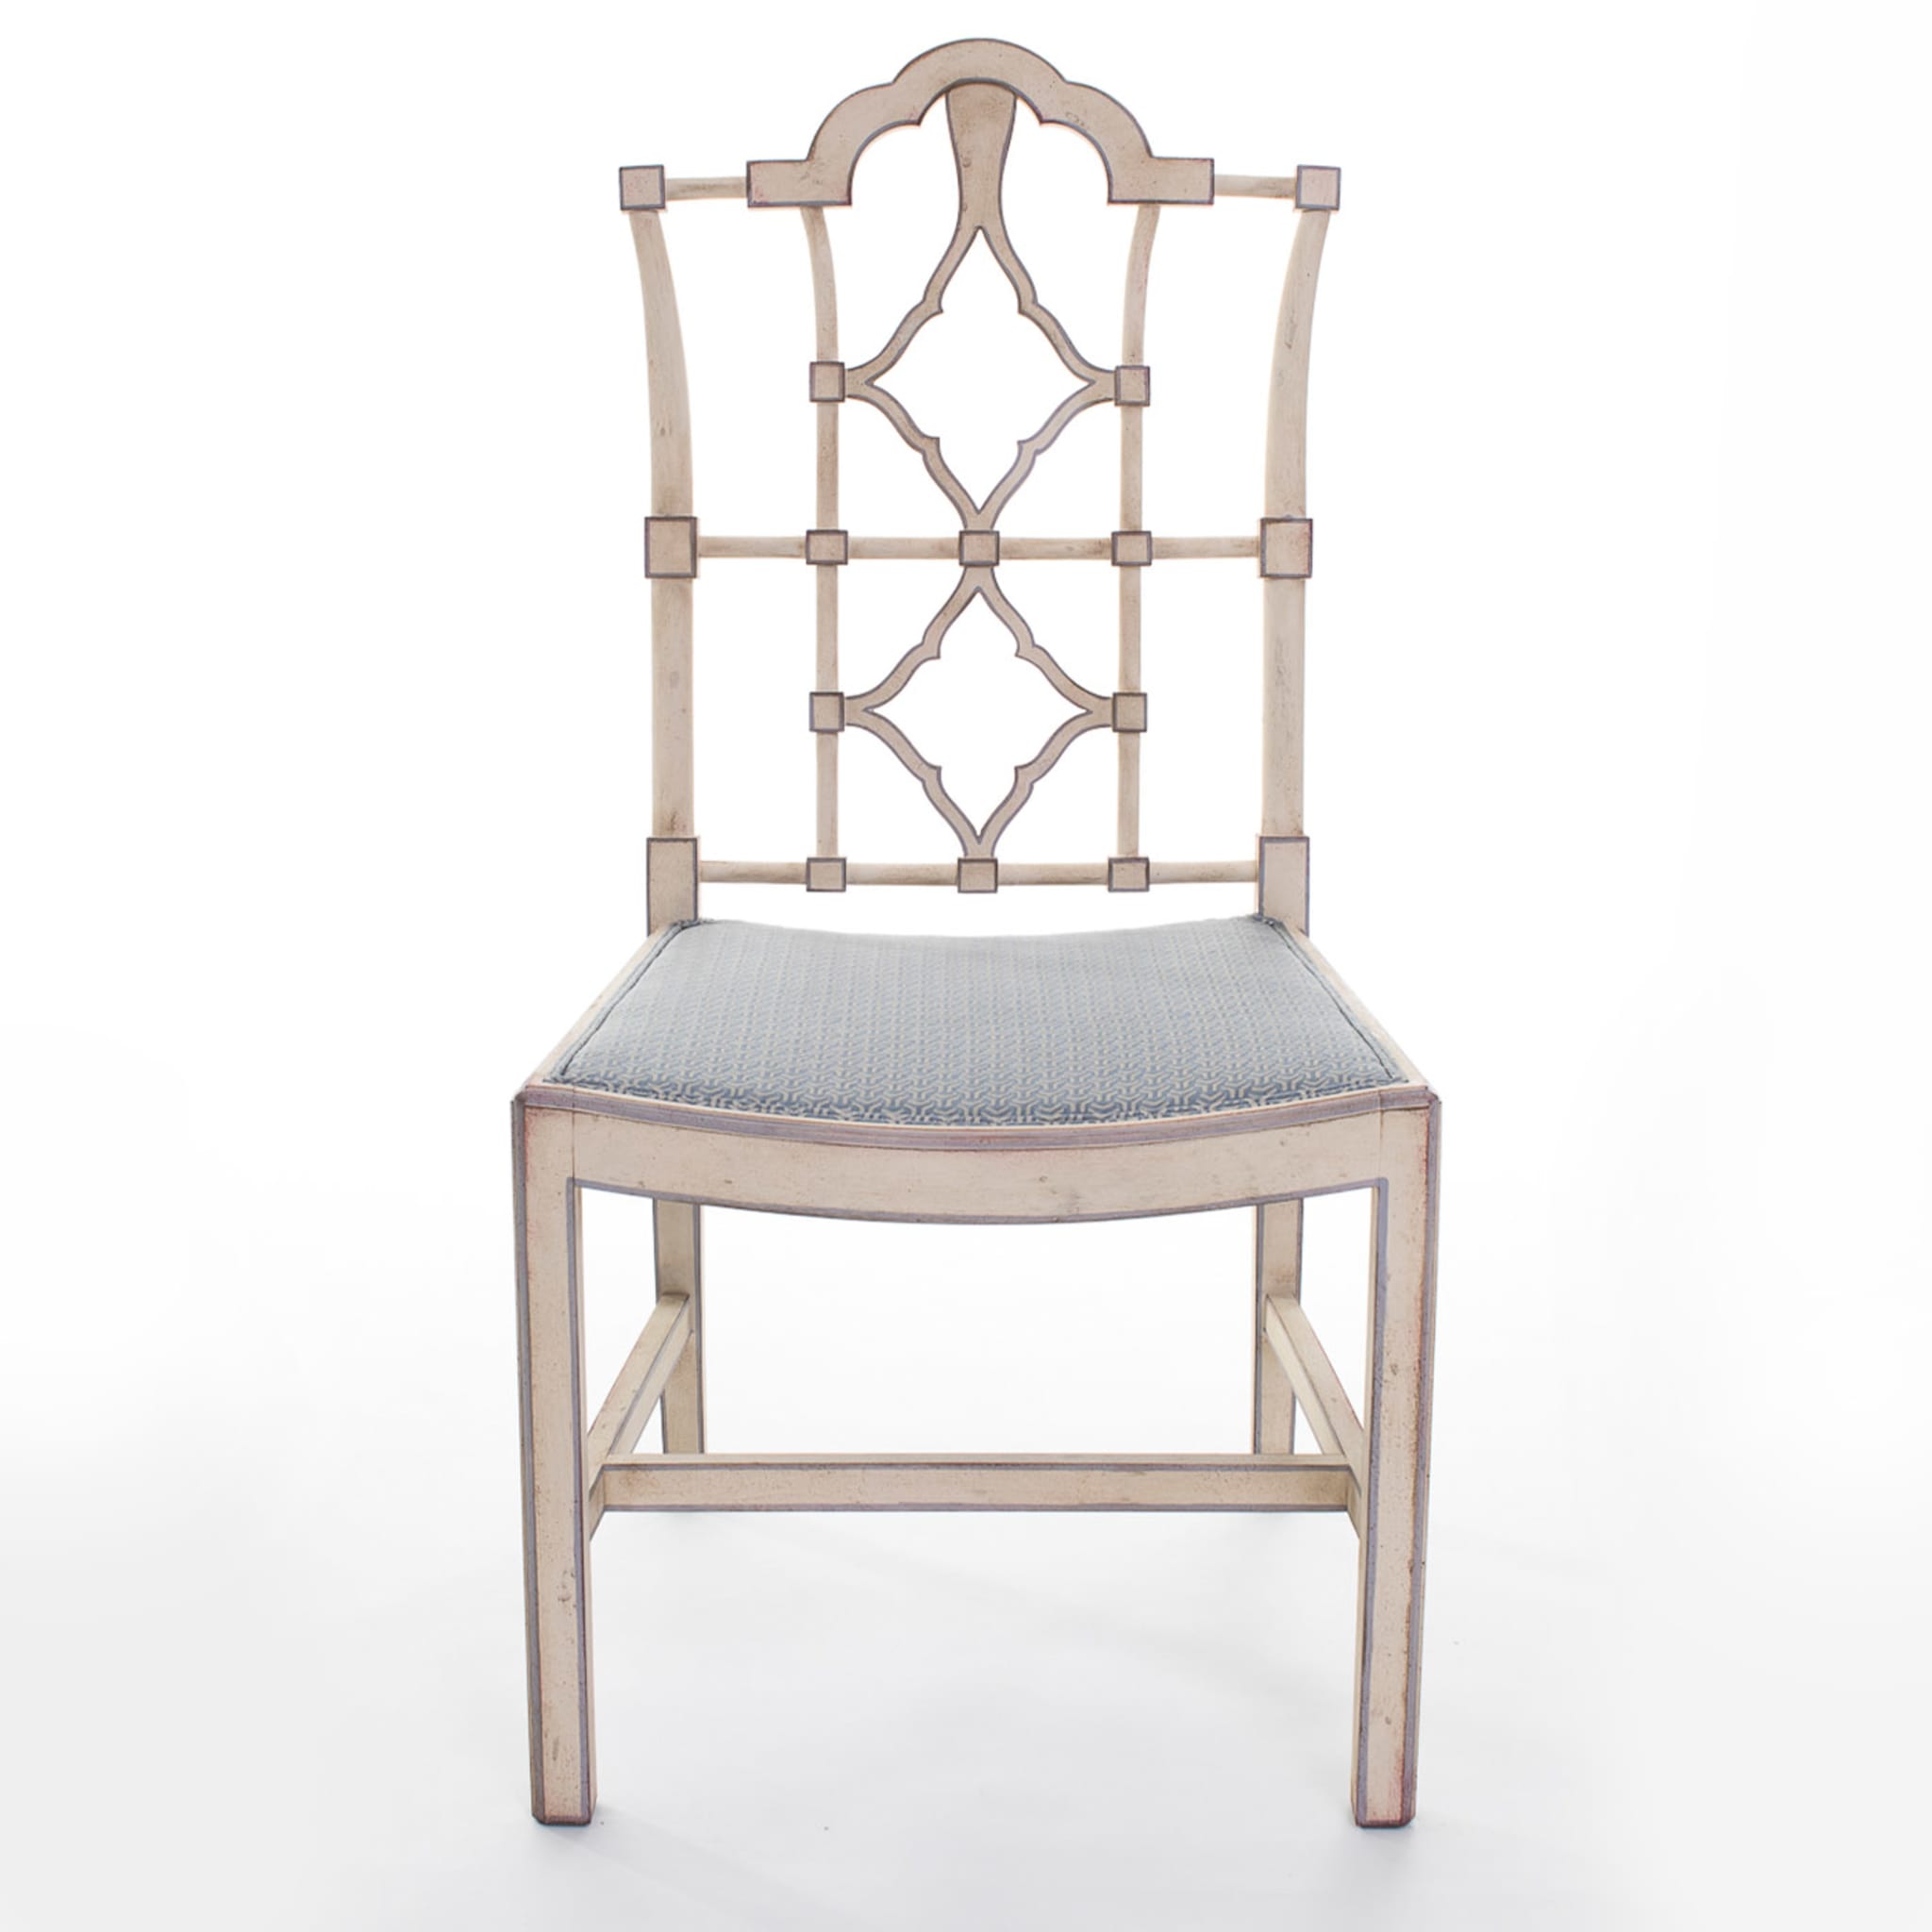 White Faenza Chair with Silver Outline - Alternative view 5